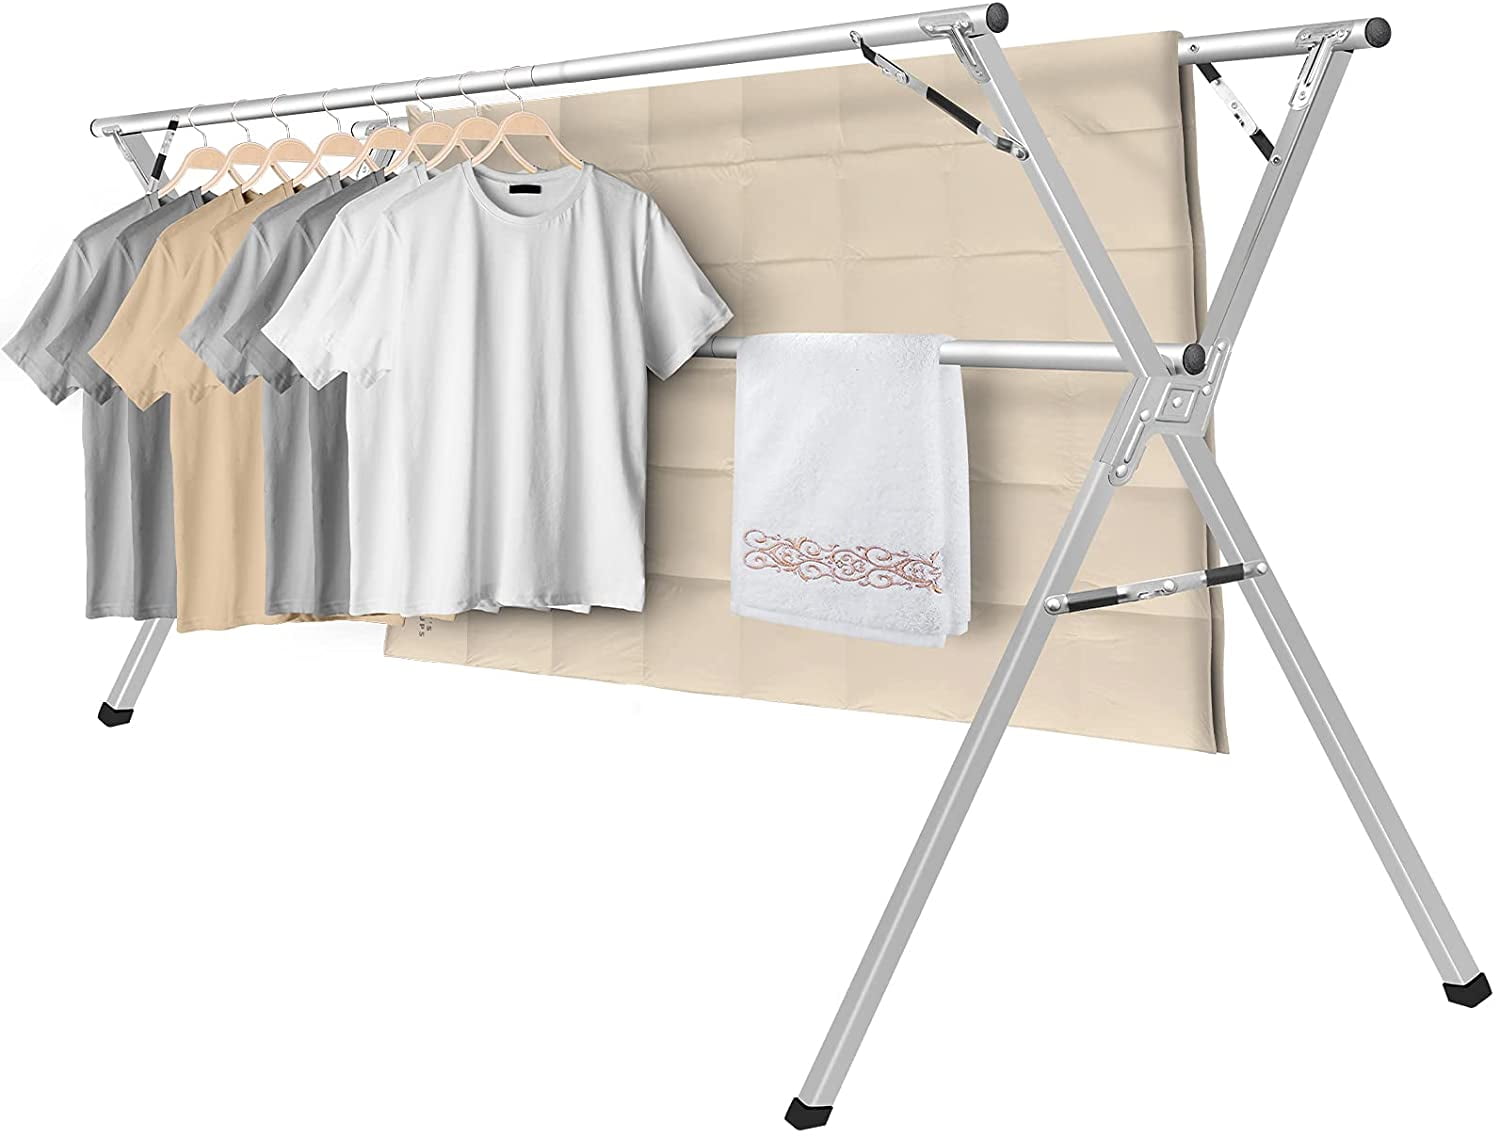 Wooden Clothes Drying Stand Folding Rack Foldable Indoor Laundry Dryer Hanger US 